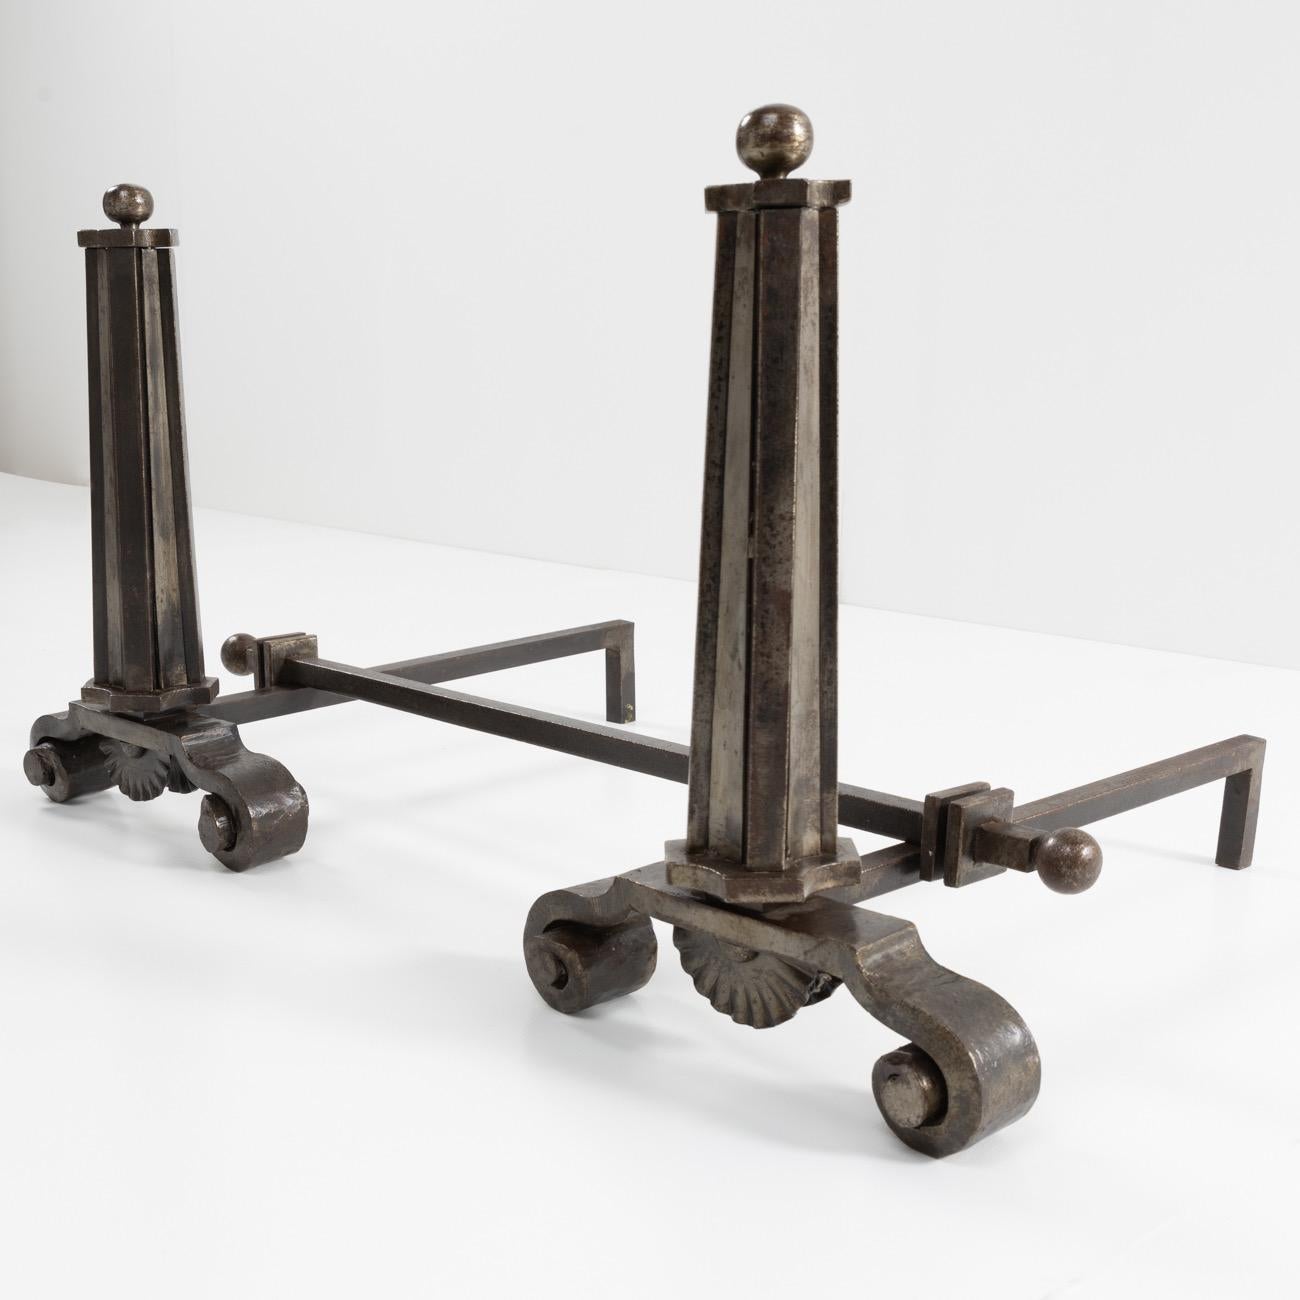 Magnificent pair of Art Deco wrought iron andirons. The frontal column shape surmounted by a decorative ball. The cross bar is mobile. Each andiron signed under the shell 